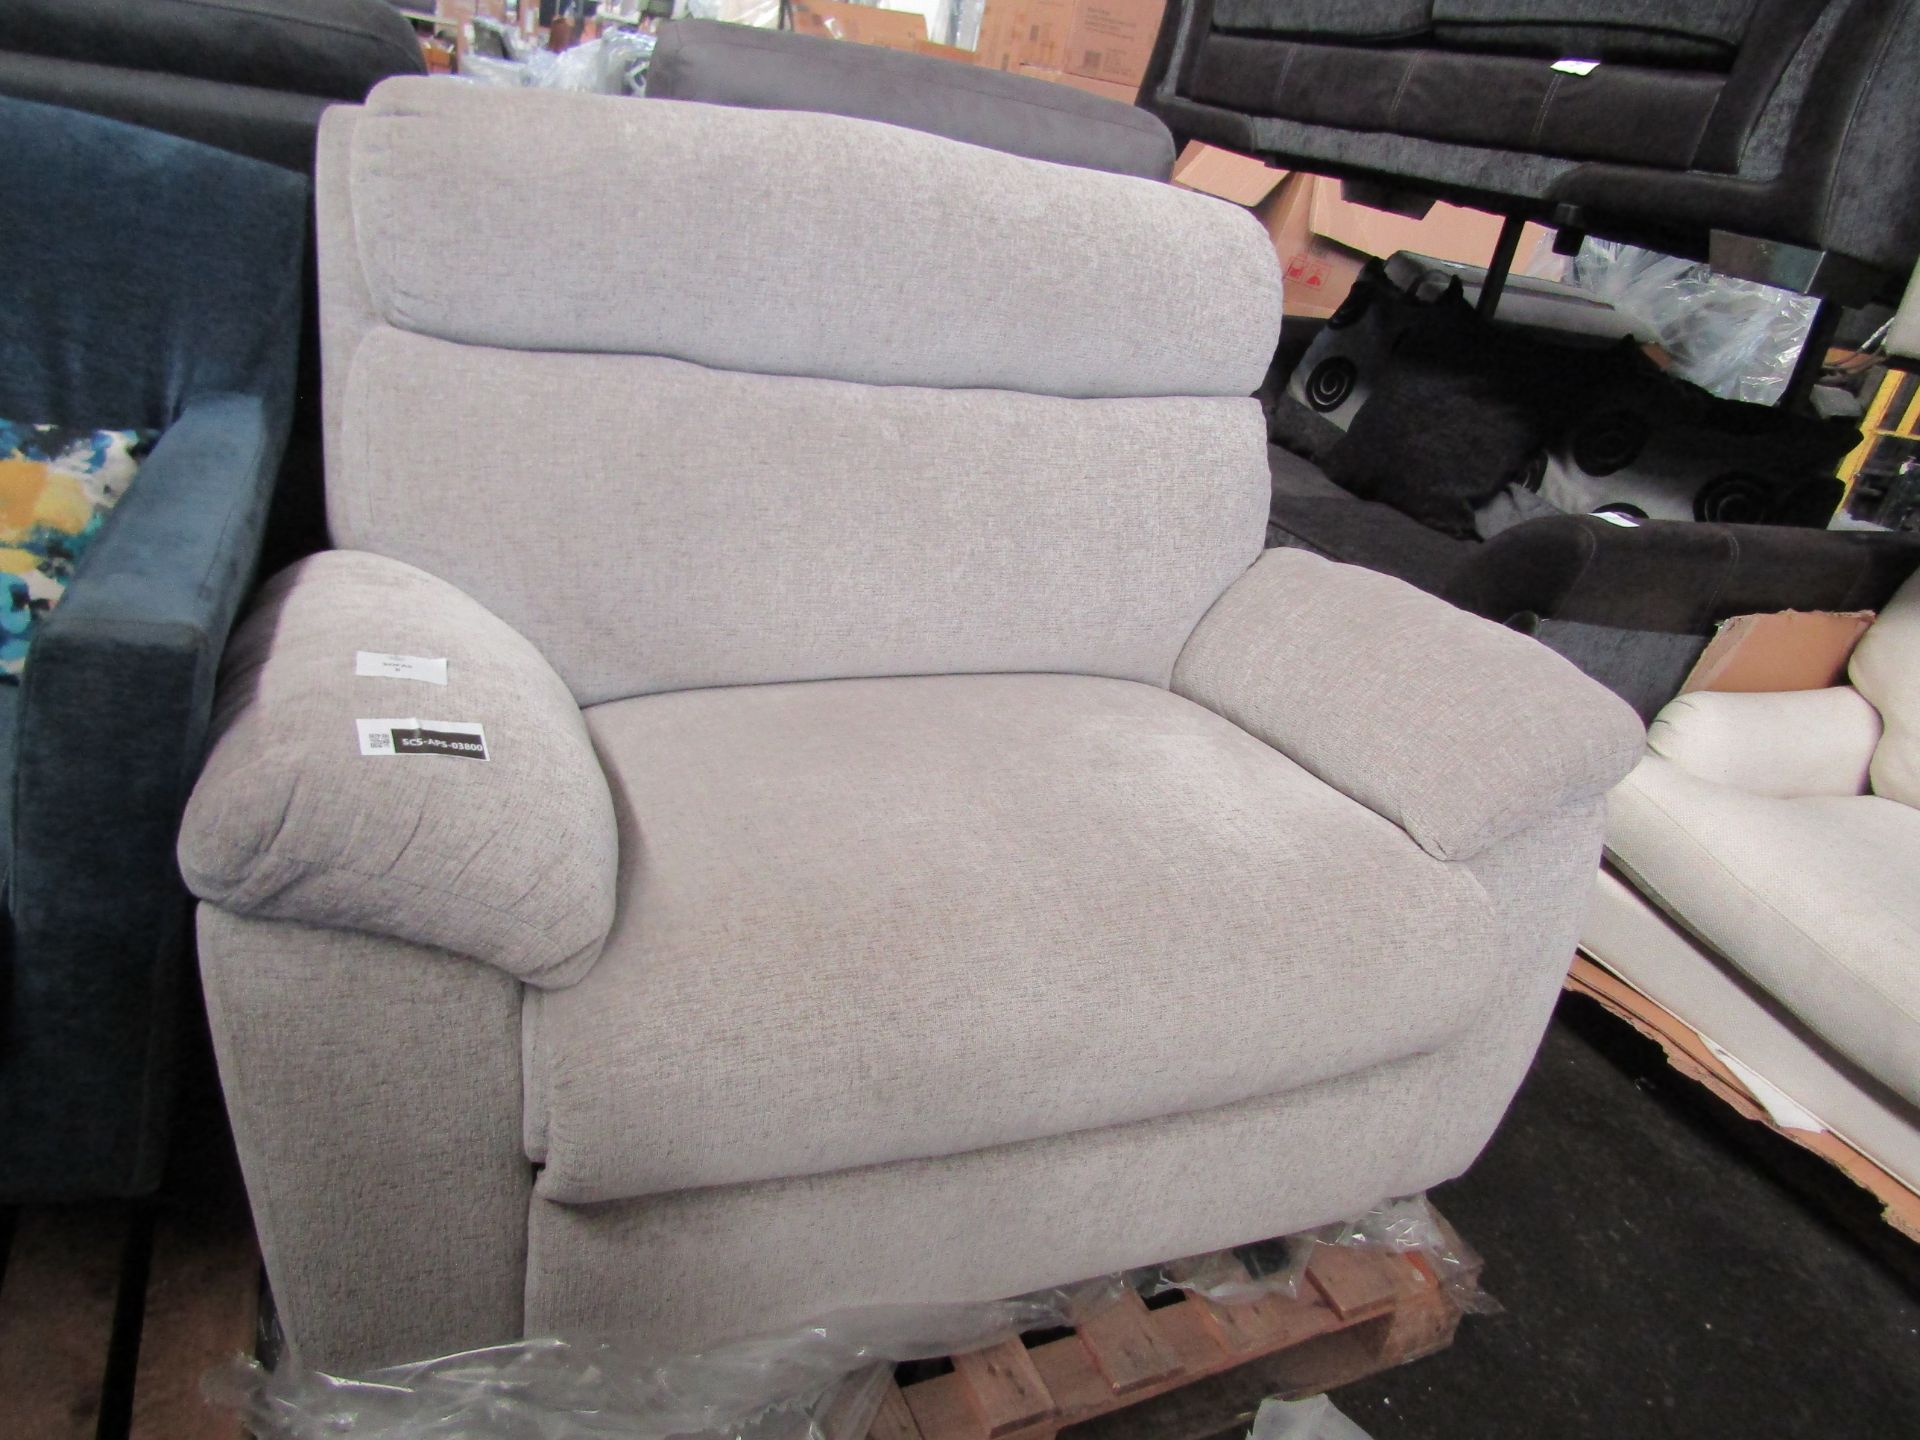 Cloud Love Seat Manual Recliner Cloud Silver No Wood2 RRP 749 About the Product(s) Cloud Love Seat - Image 2 of 2